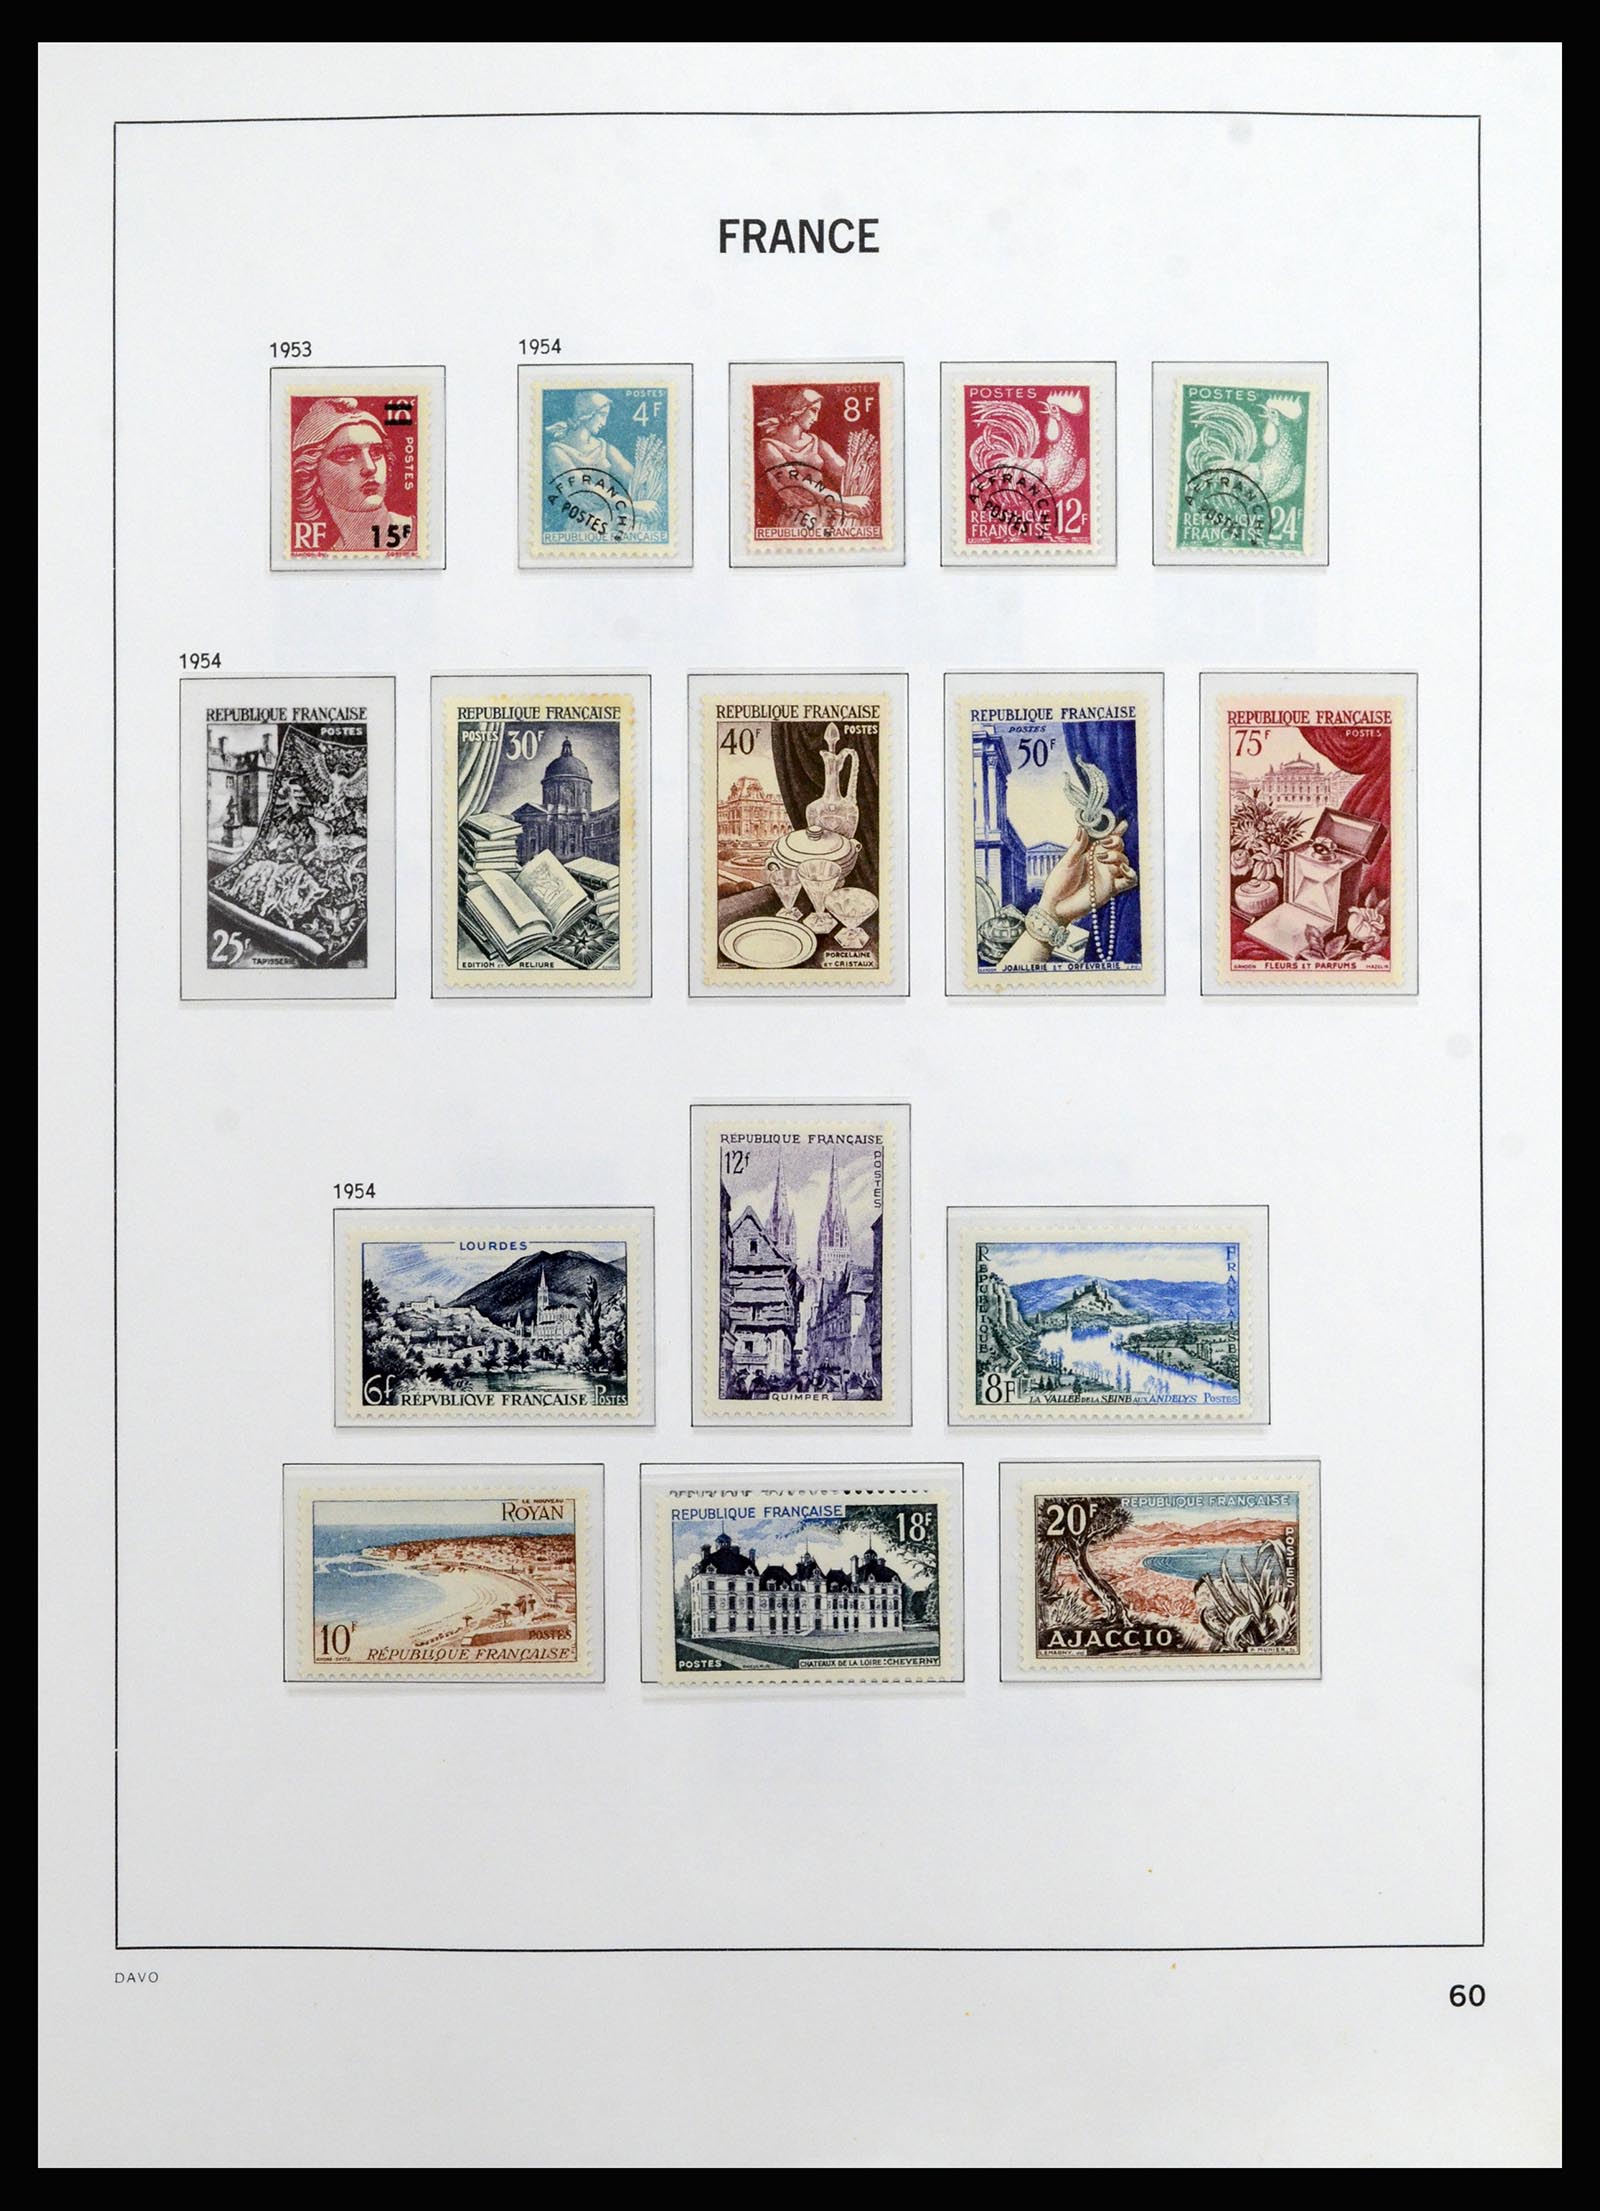 37089 060 - Stamp collection 37089 France 1863-2002.